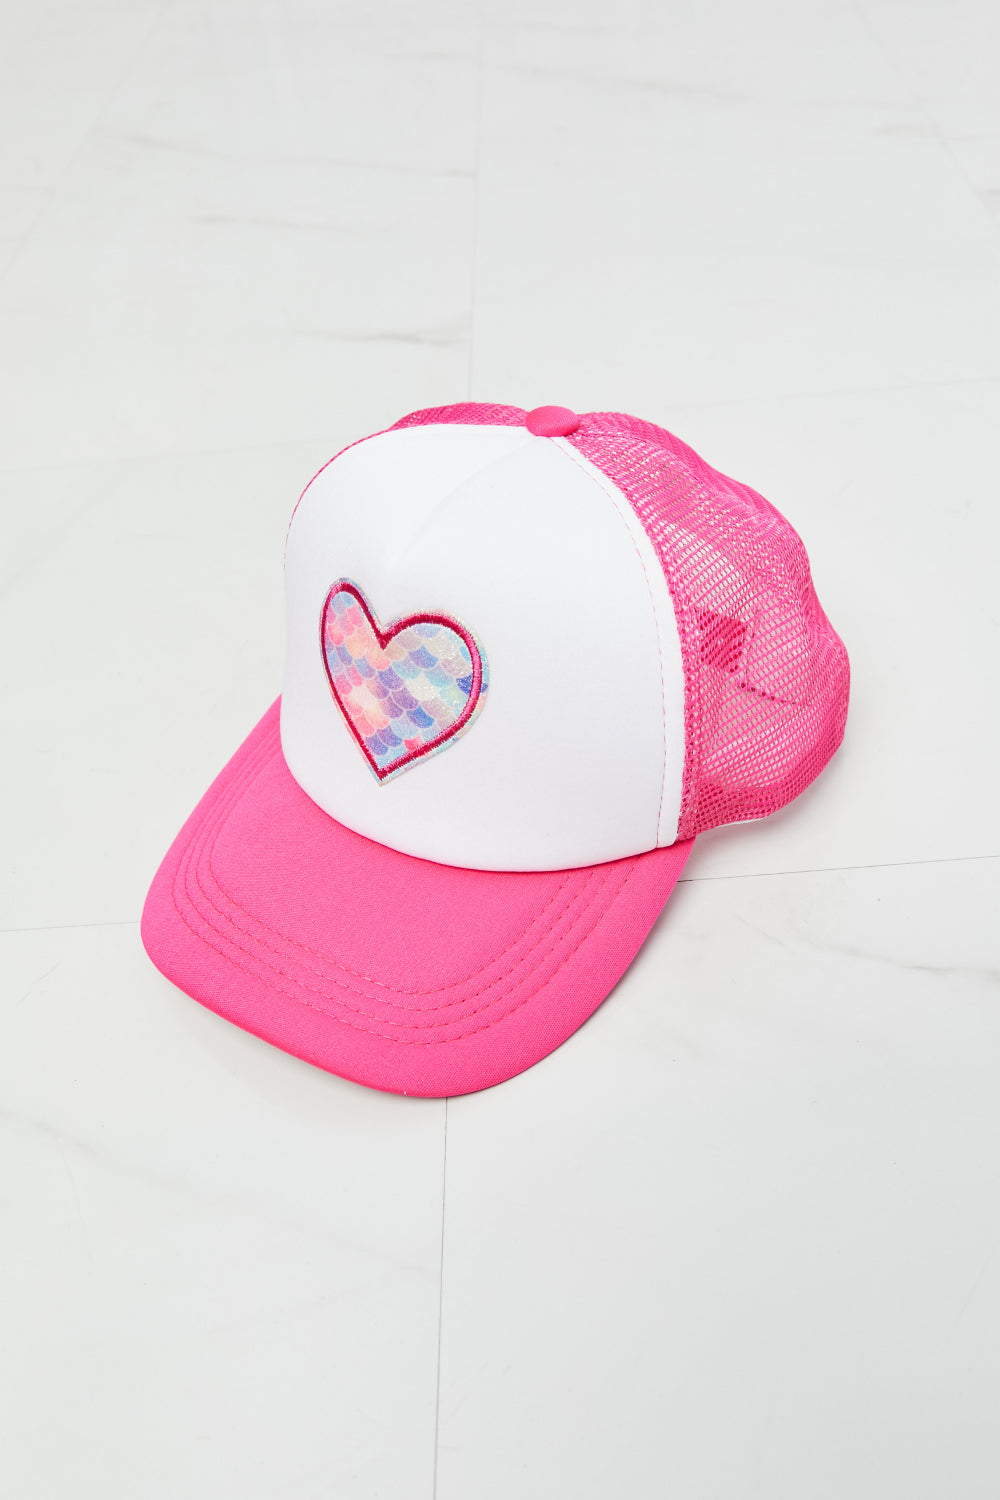 - Fame Falling For You Trucker Hat in Pink - Ships from The US - hat at TFC&H Co.